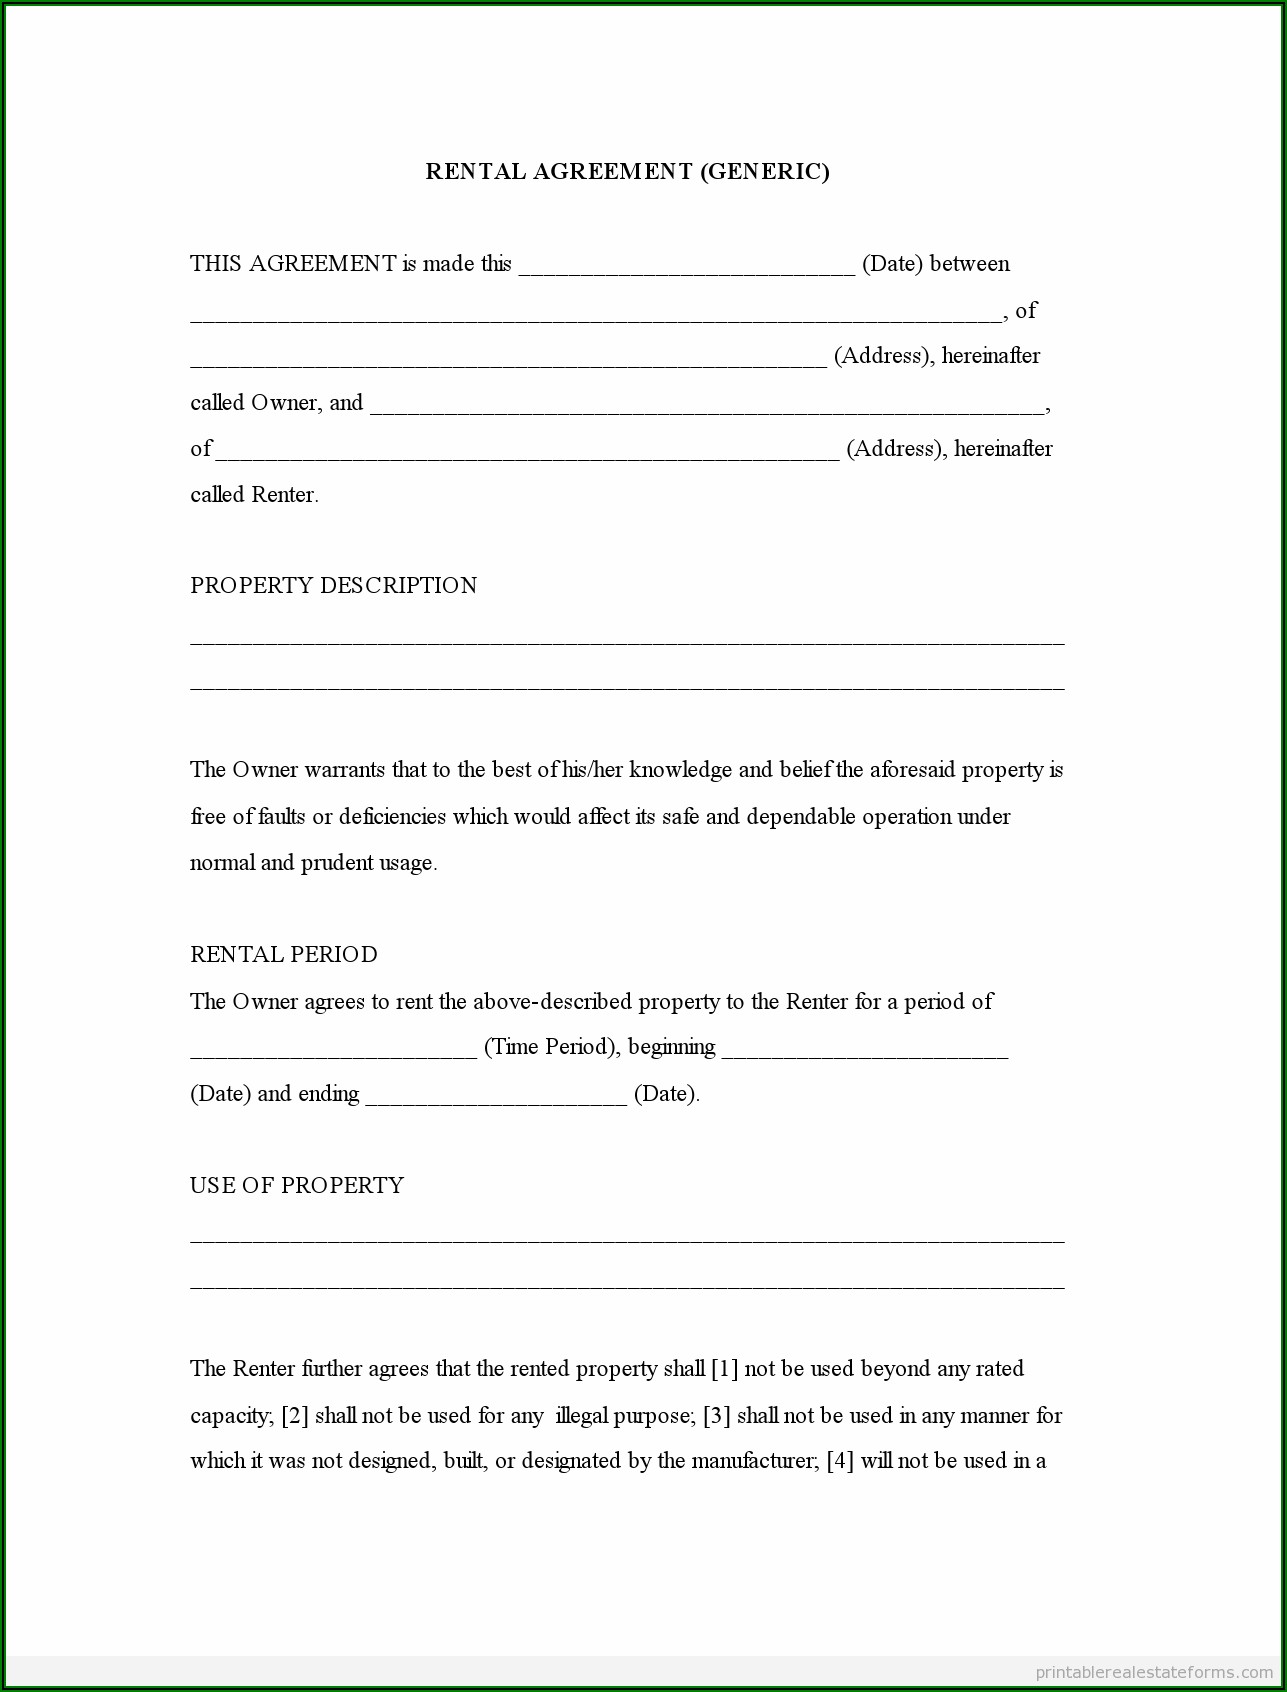 Free Residential Lease Agreement Forms To Print